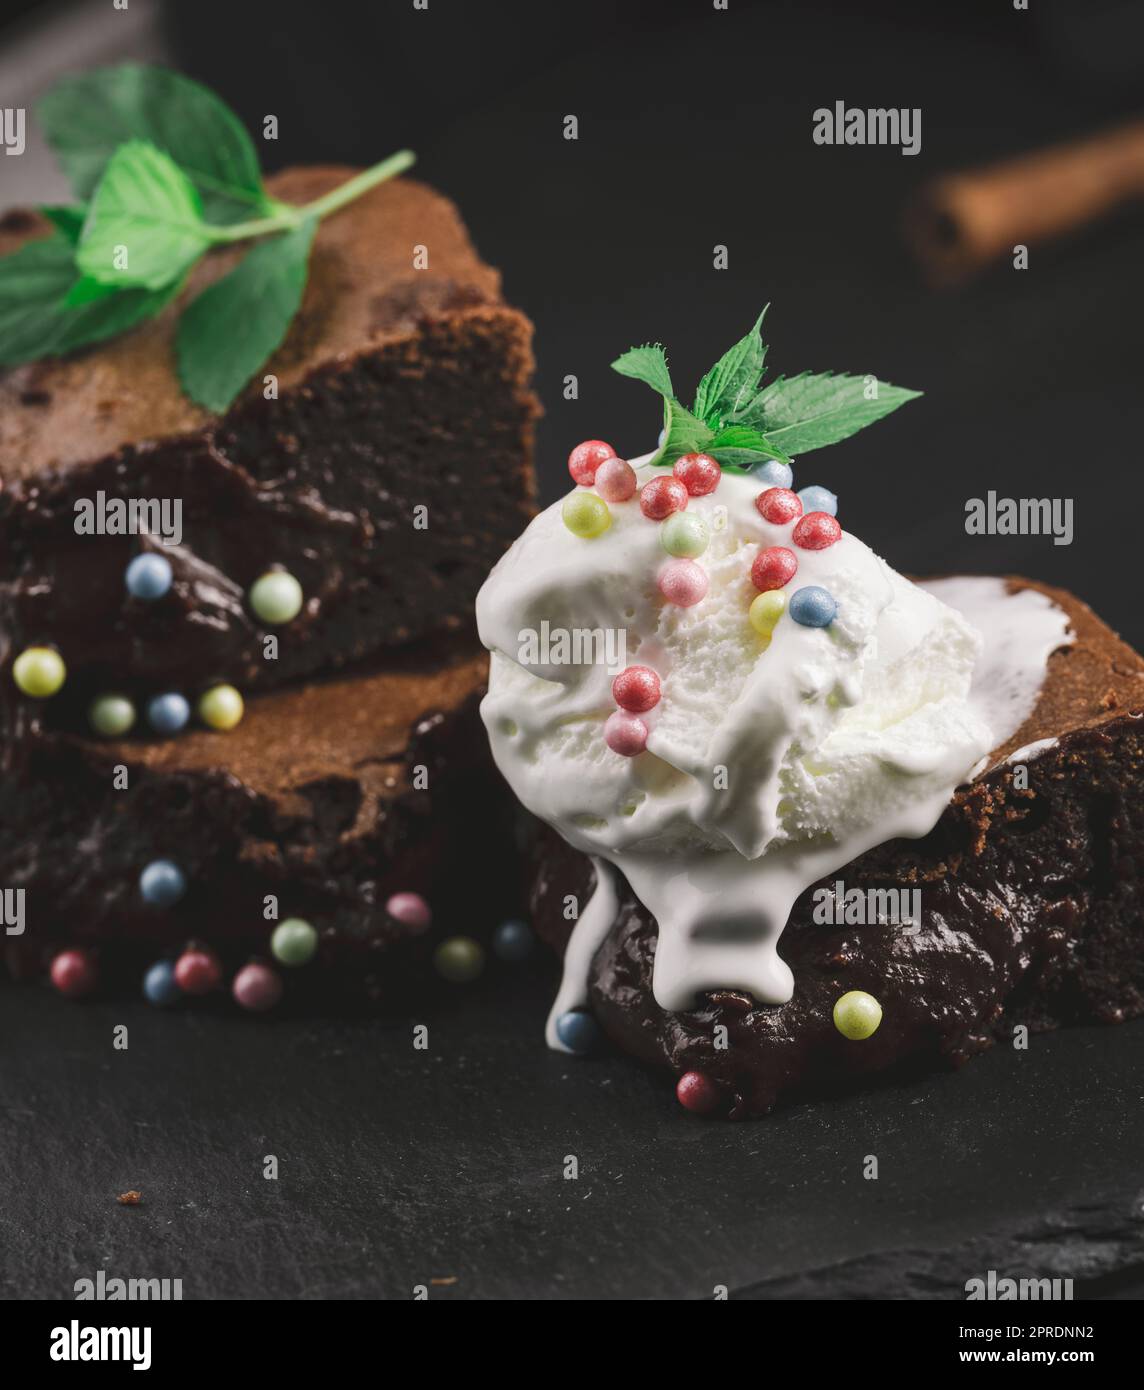 Baked pieces of chocolate brownie pie on a black table, on top of a scoop of ice cream Stock Photo